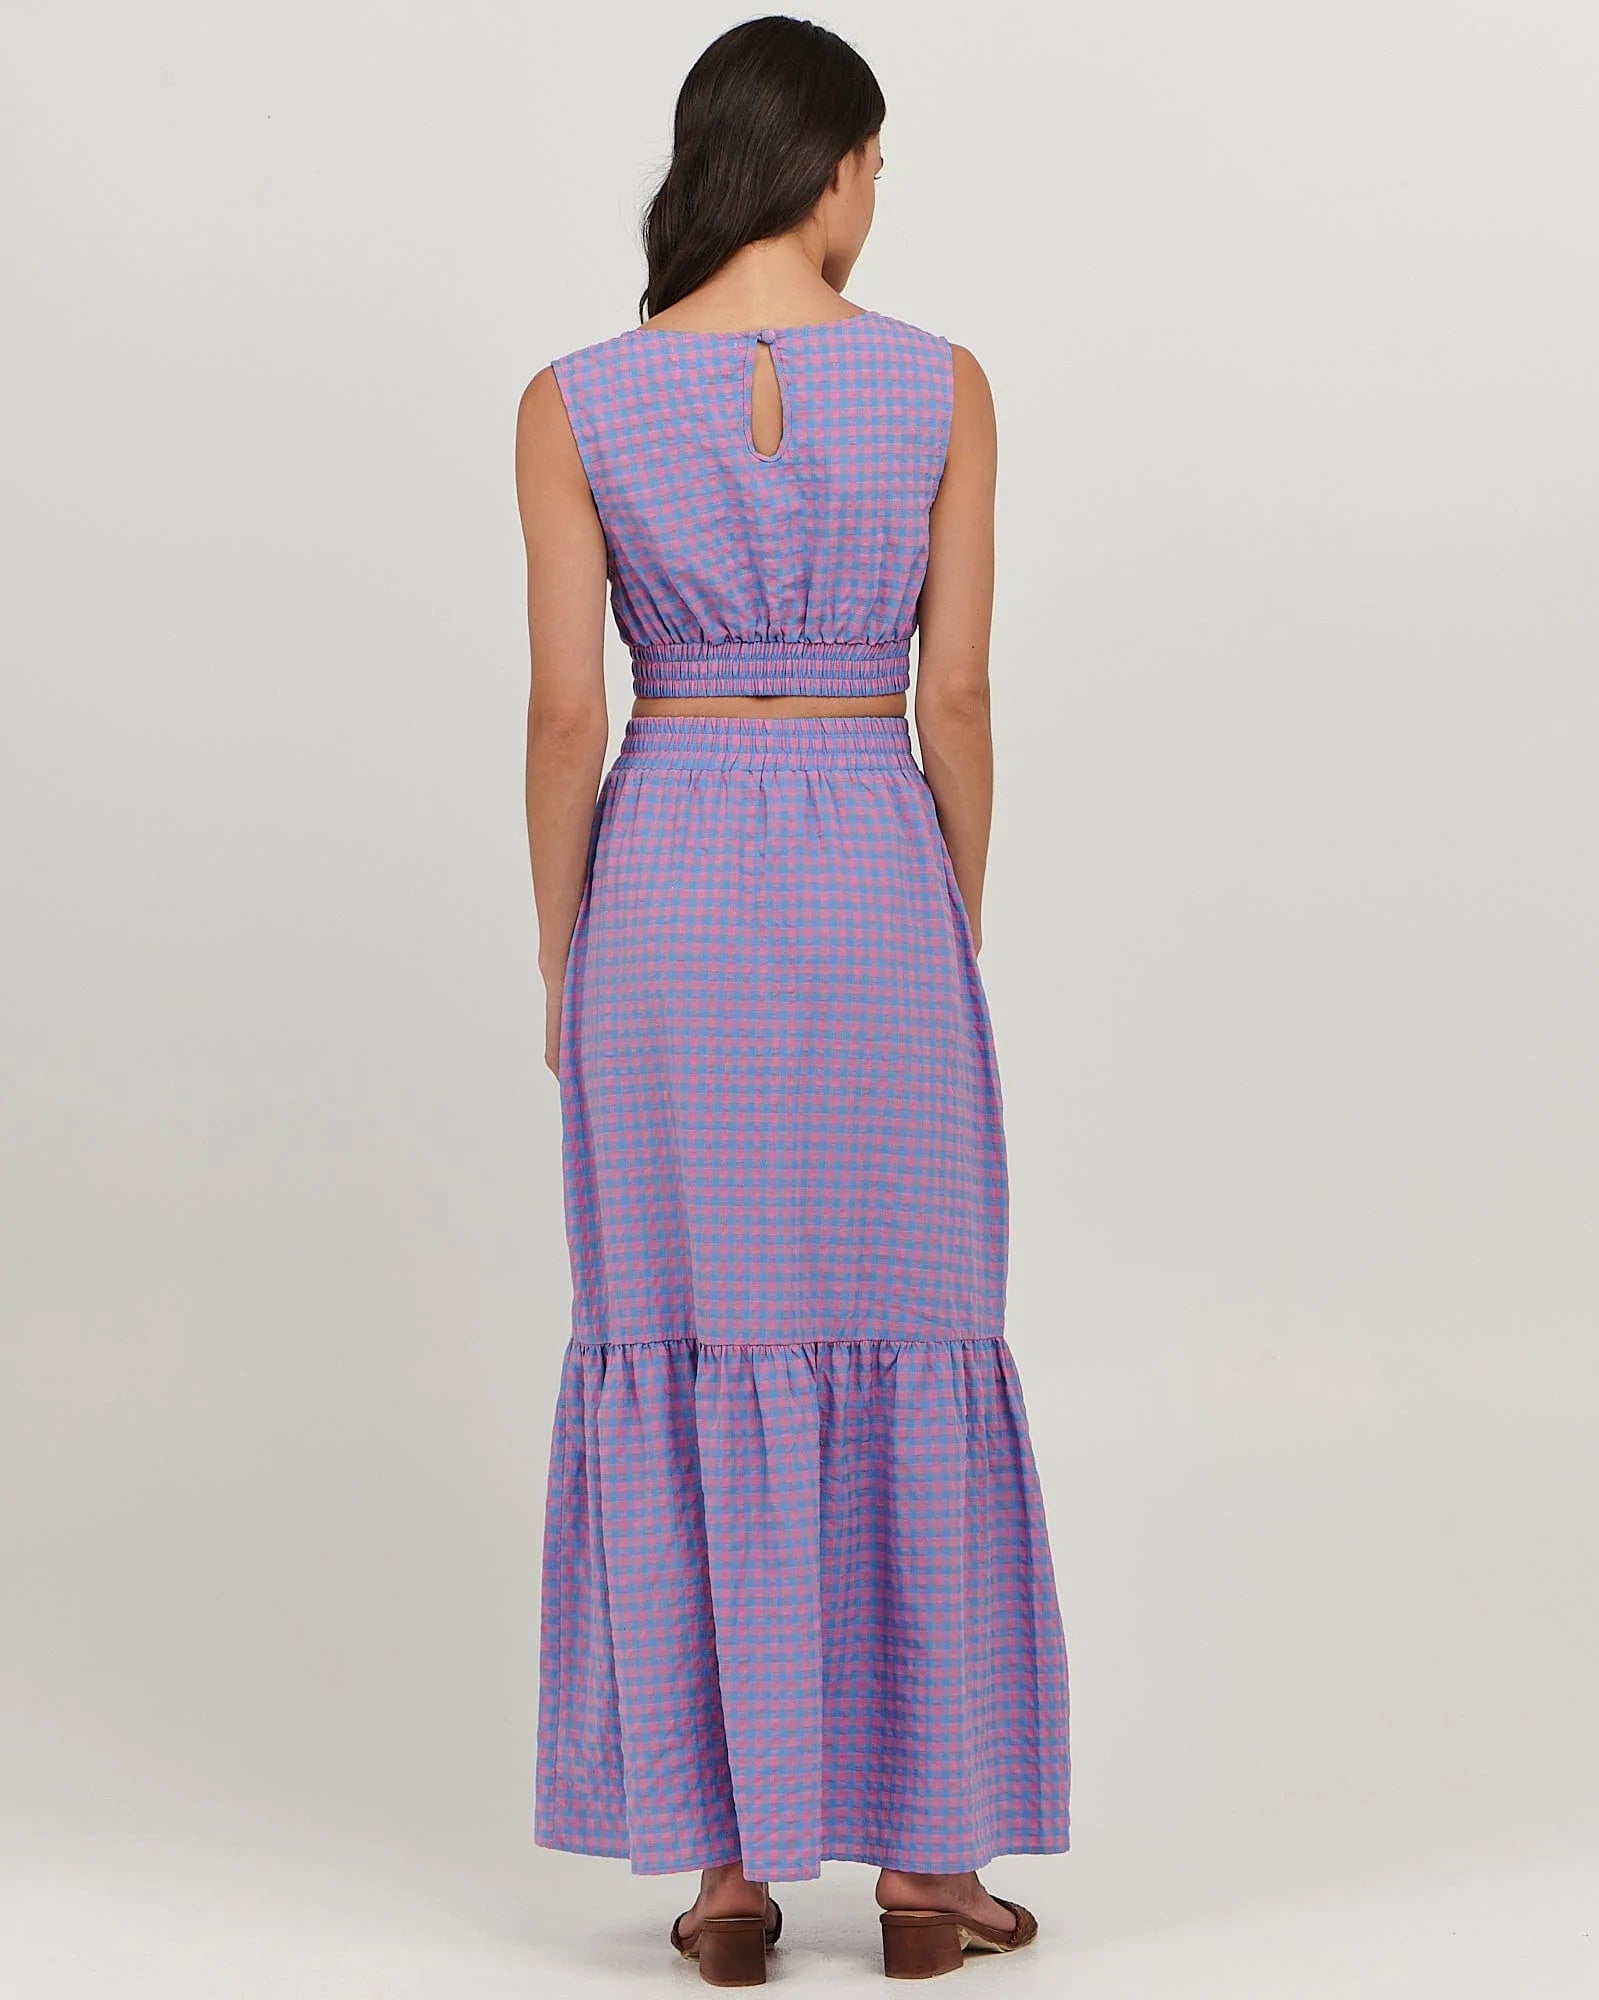 Gingham and Heels - an incredible shot in our Lumina Maxi